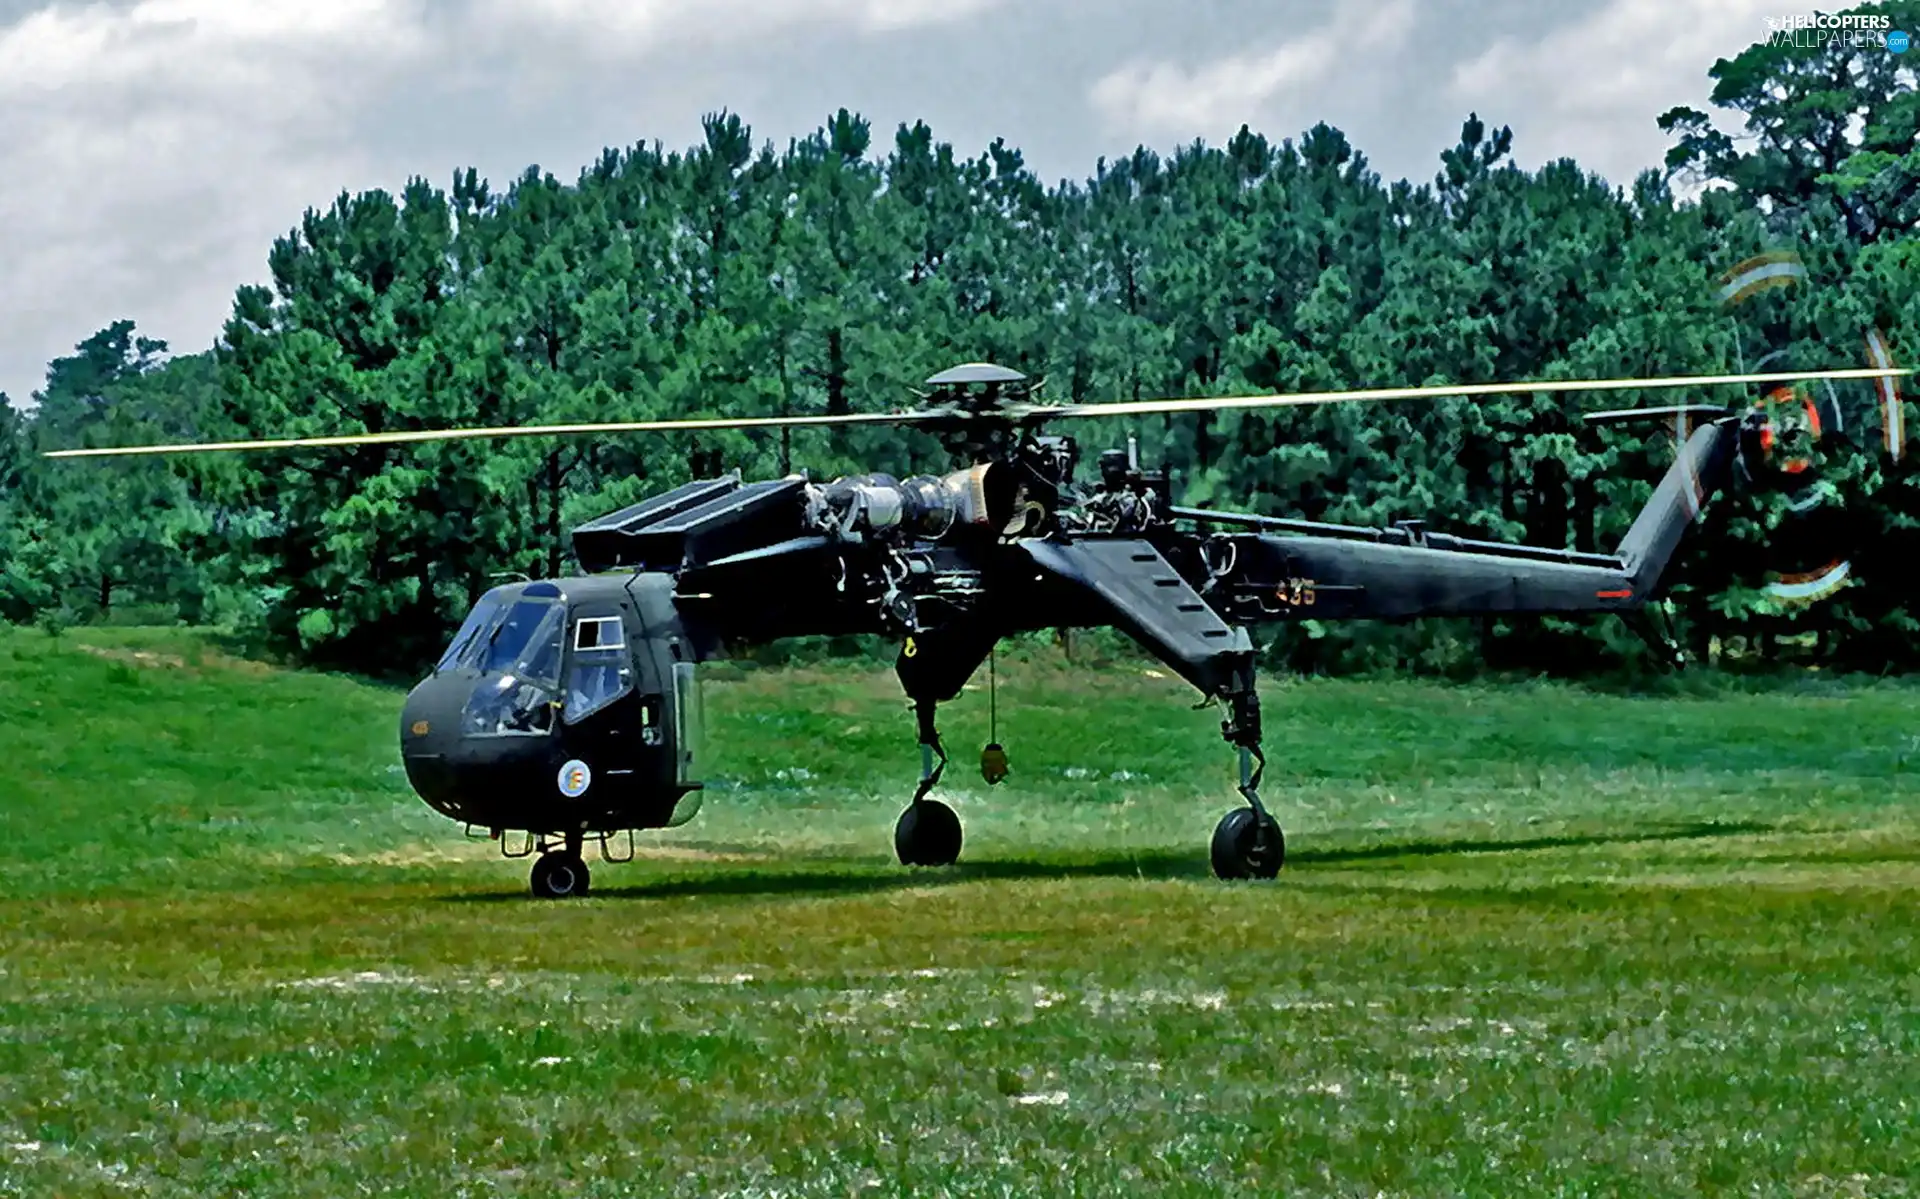 carrying-54-sikorsky-ch-helicopter-tarhe.jpg